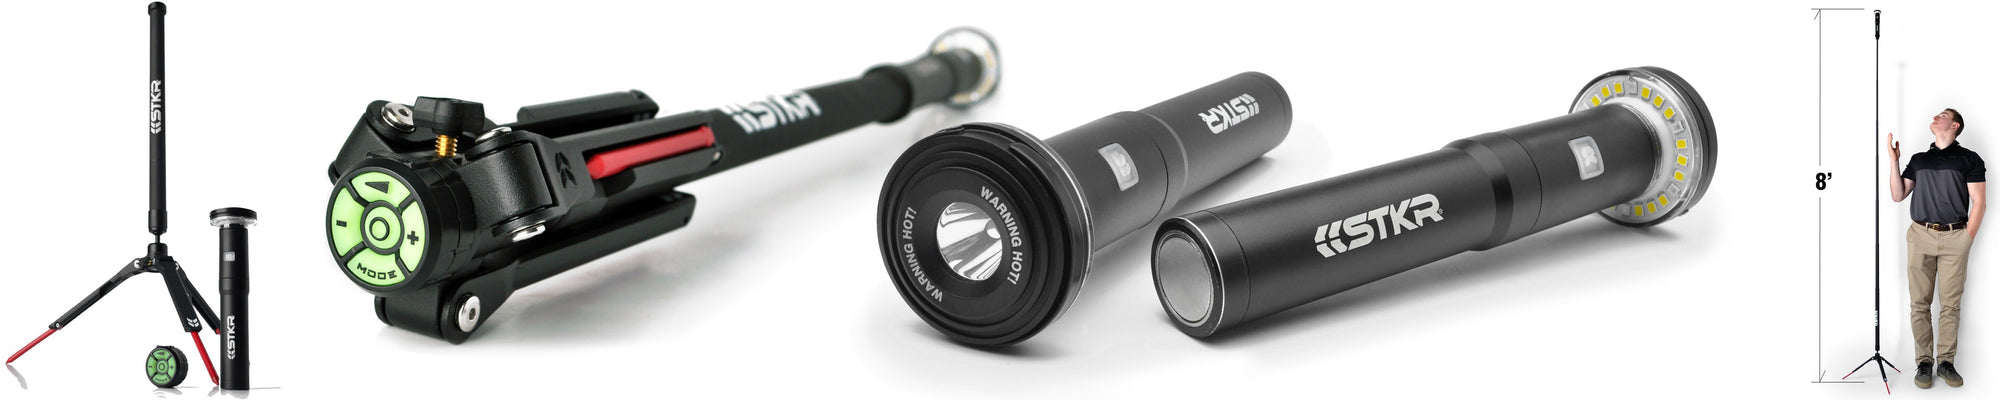 STKR Concepts - FLi-PRO Telescoping Light with Removeable Flashlight - extend light up to 8 feet